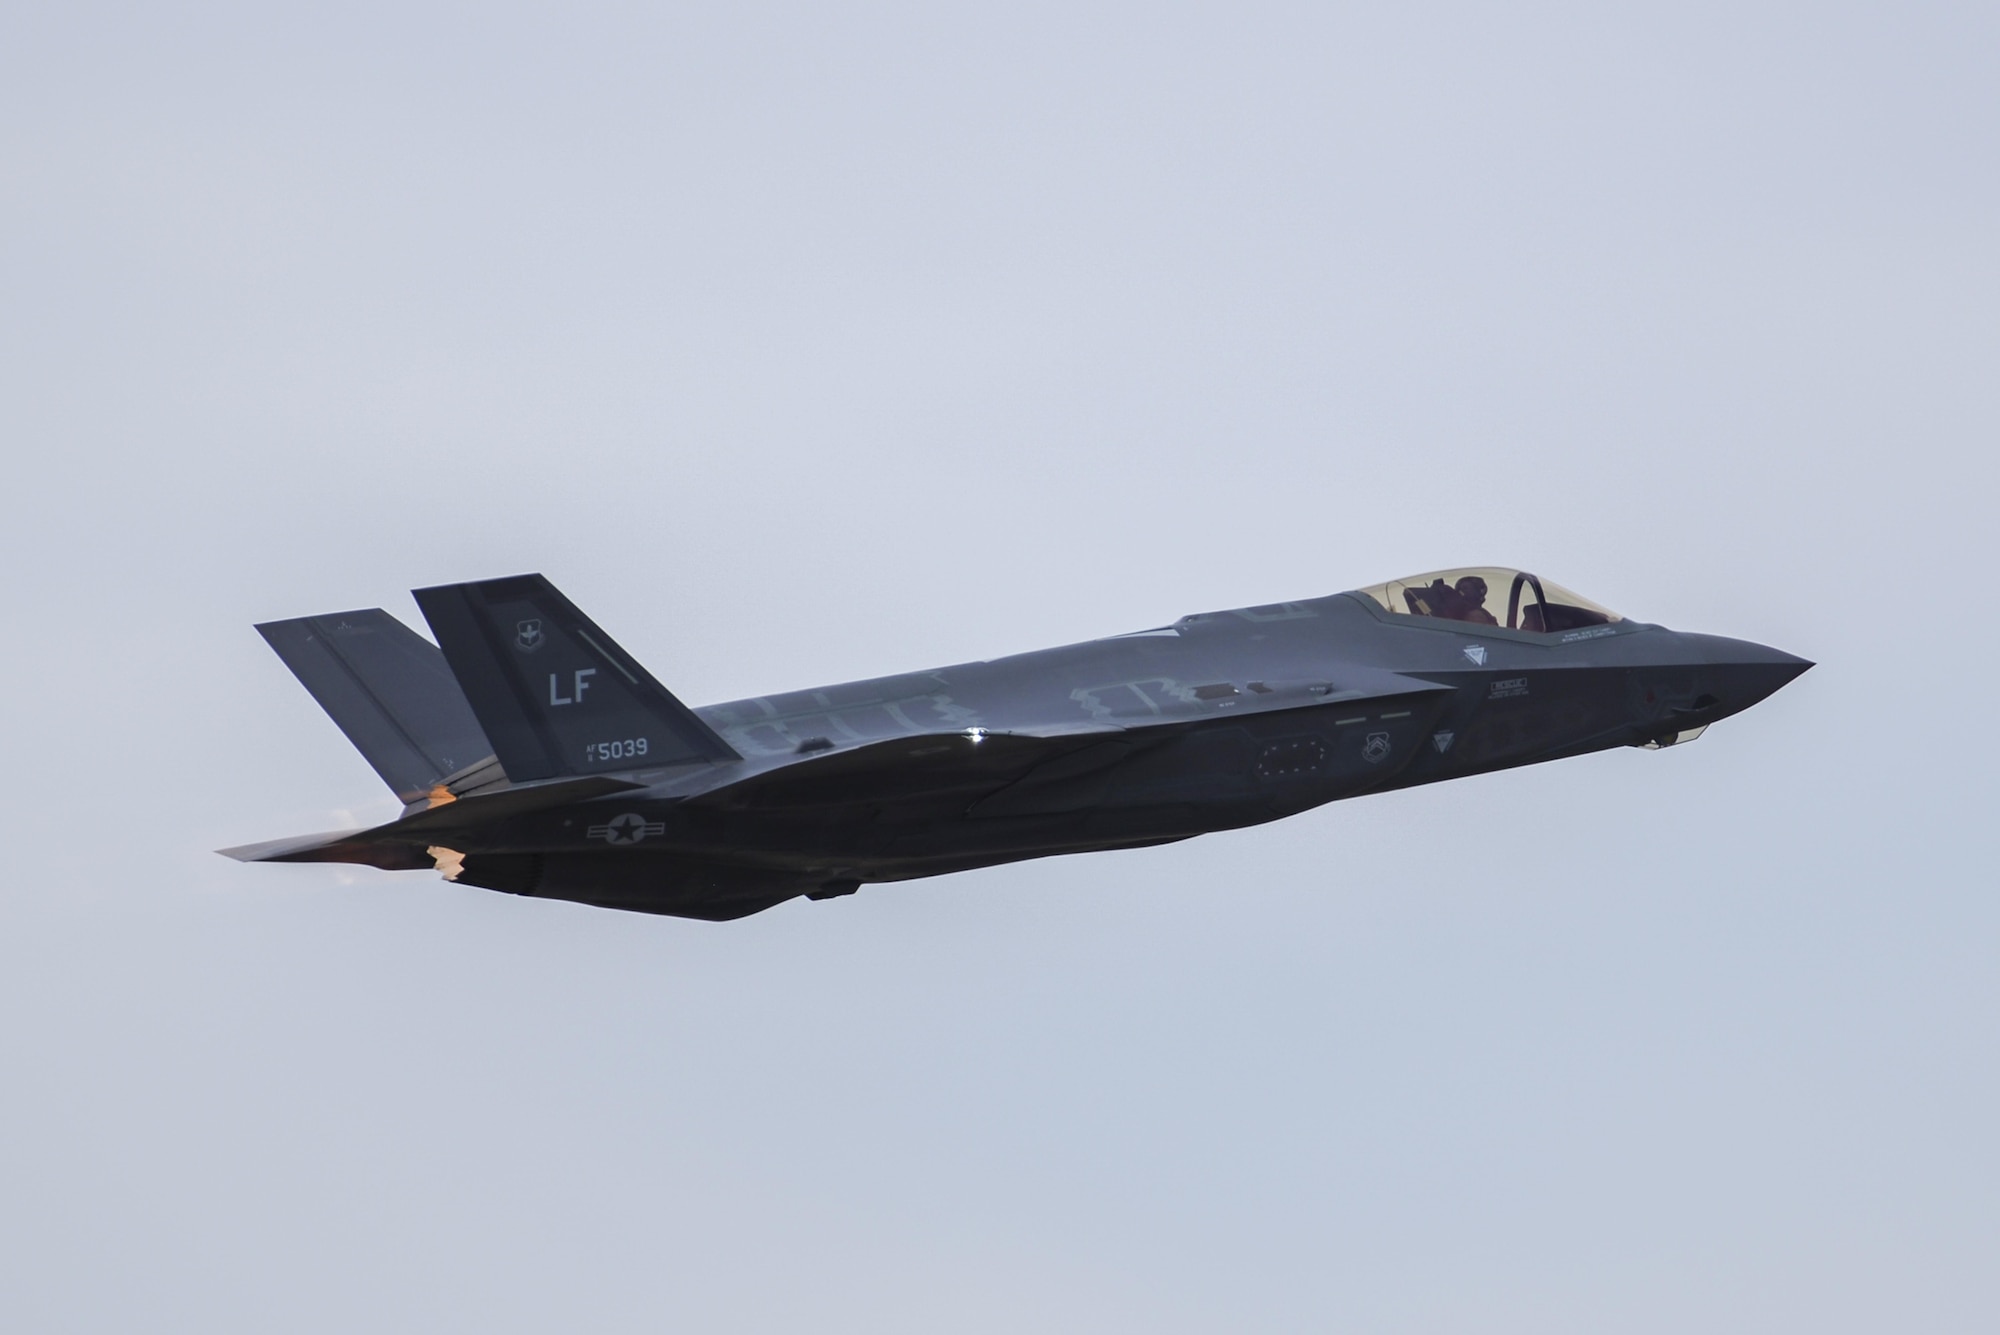 A U.S. Air Force F-35 Lightning II performs an aerial maneuver during the 2016 Heritage Flight Training and Certification Course at Davis-Monthan Air Force Base, Ariz., March 6, 2016. The Raptor performs both air-to-air and air-to-ground missions allowing full realization of operational concepts vital to the 21st century Air Force. (U.S. Air Force photo by Senior Airman Chris Massey/Released)